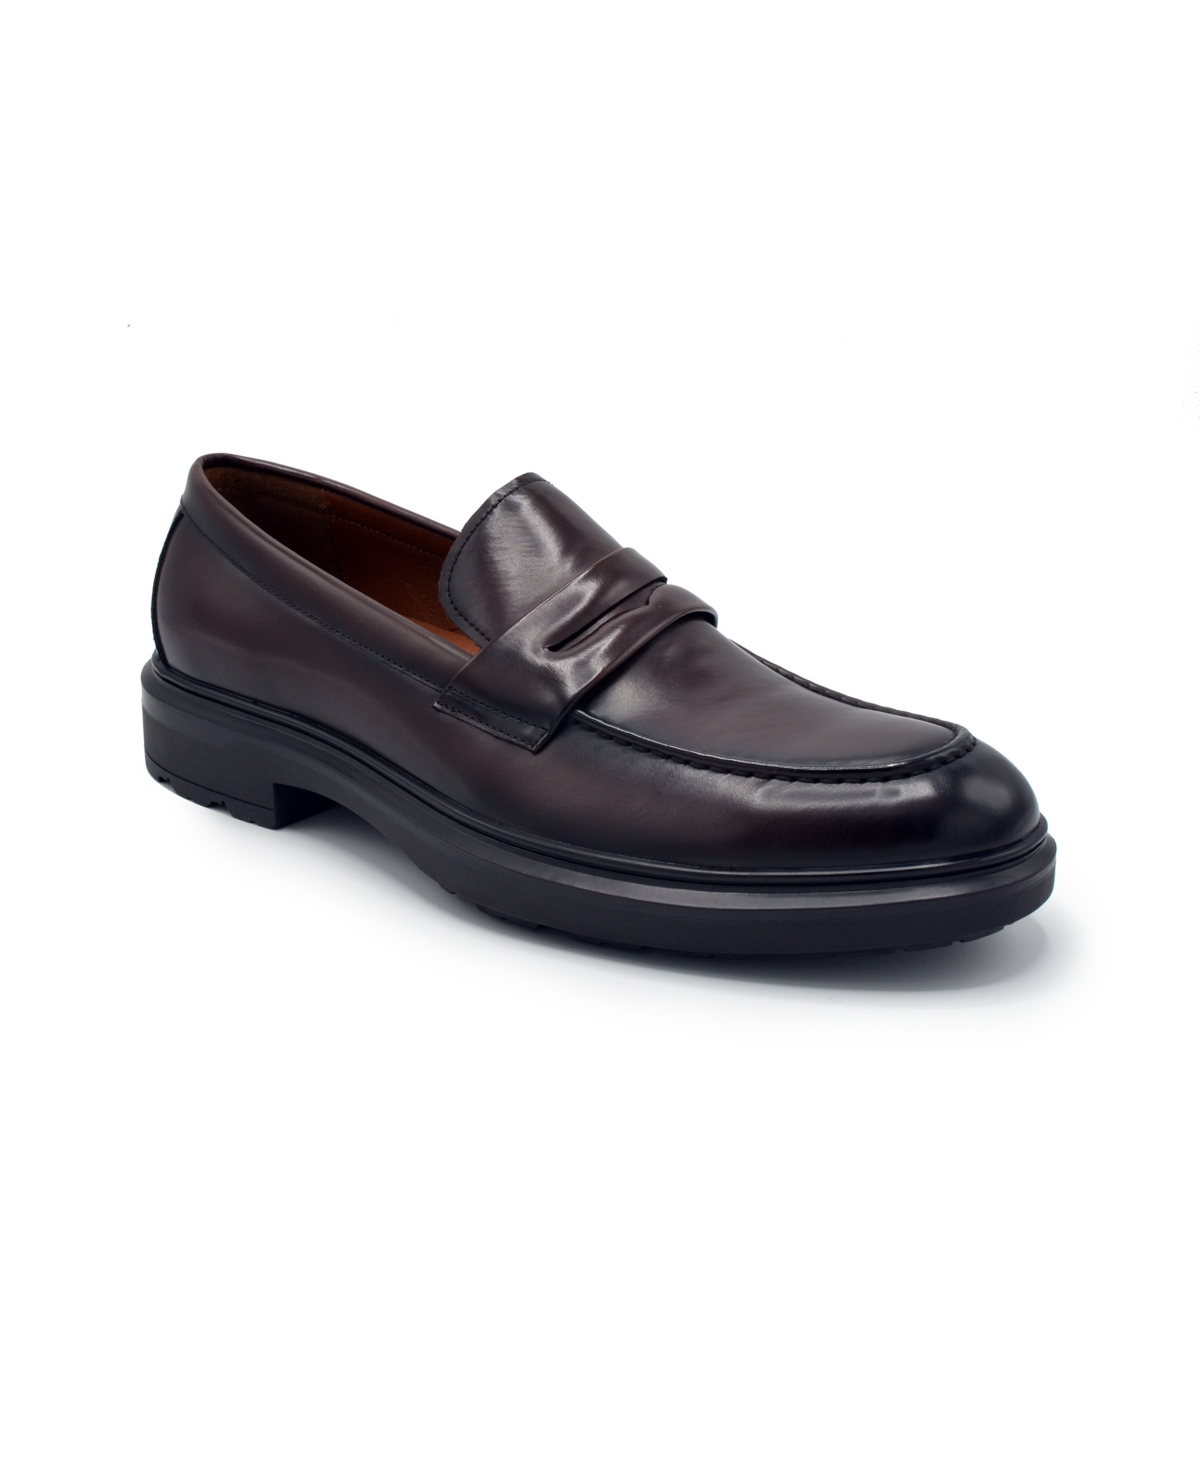 Aston Marc Men's Tuscan Penny Loafer Dress Shoes Men's Shoes In Brown